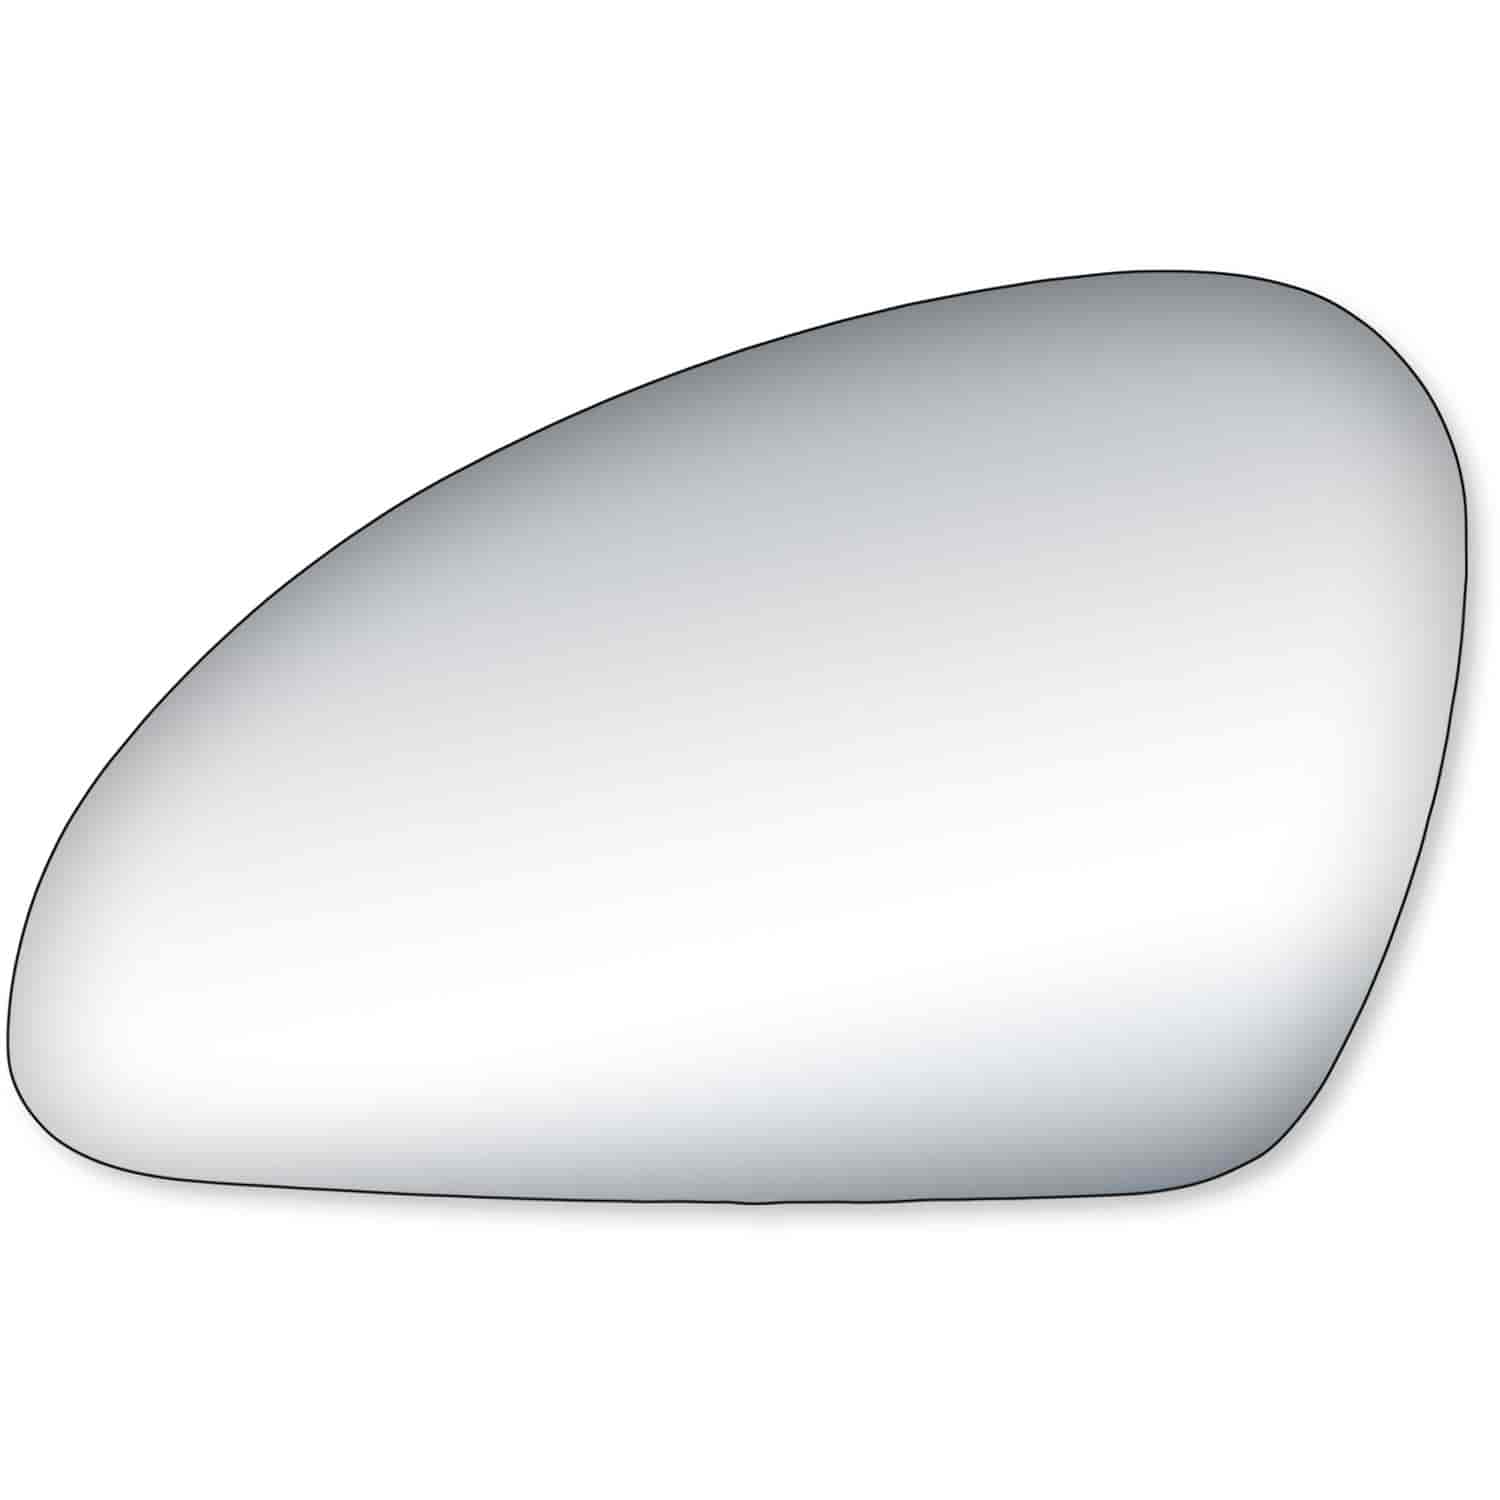 Replacement Glass for 97-02 Escort; 97-02 Tracer the